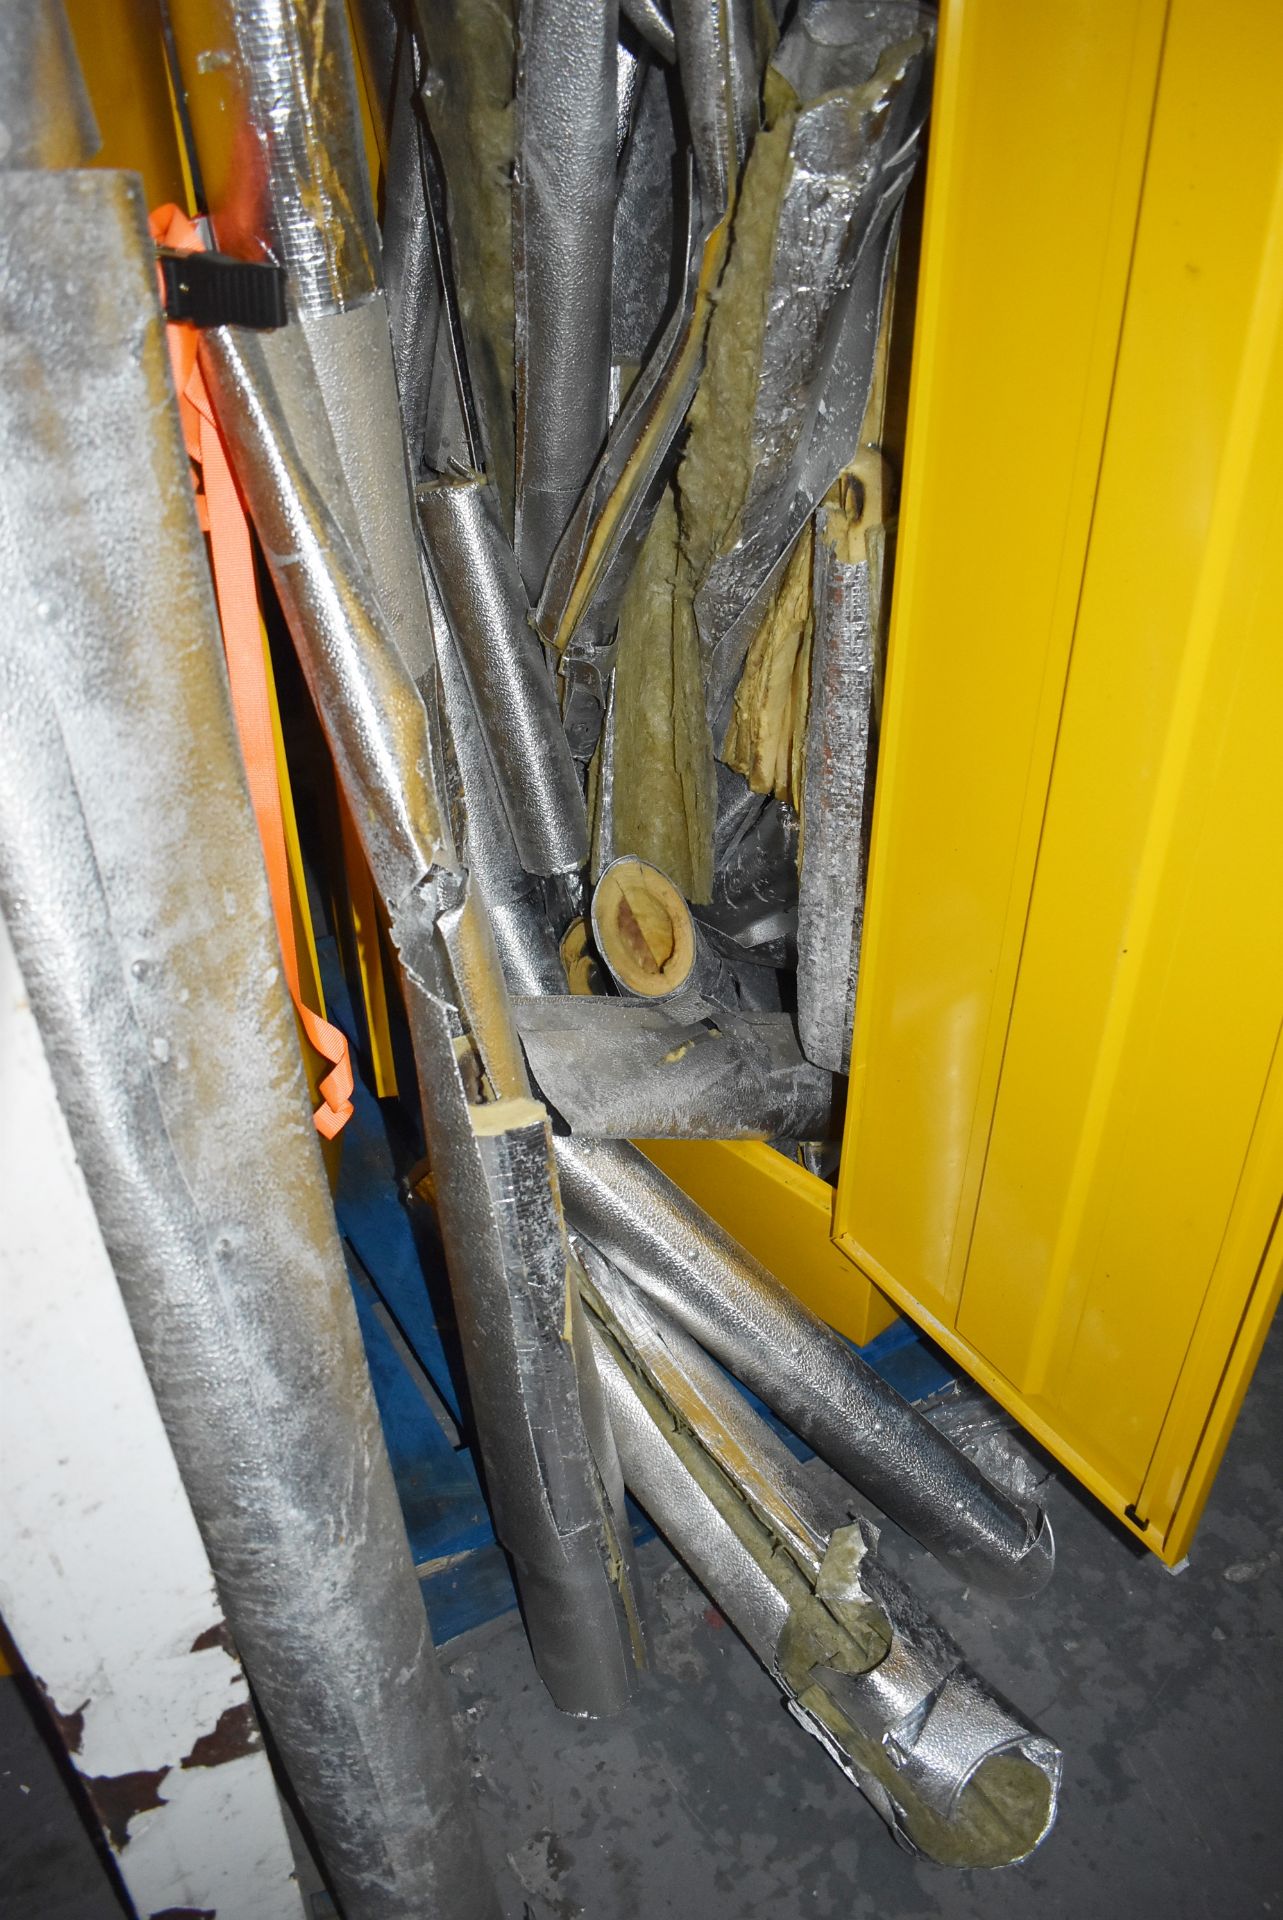 Large Quantity of Thermal Pipe Covering Contents of Two Upright Cabinets - Cabinets Not Included - - Image 7 of 10